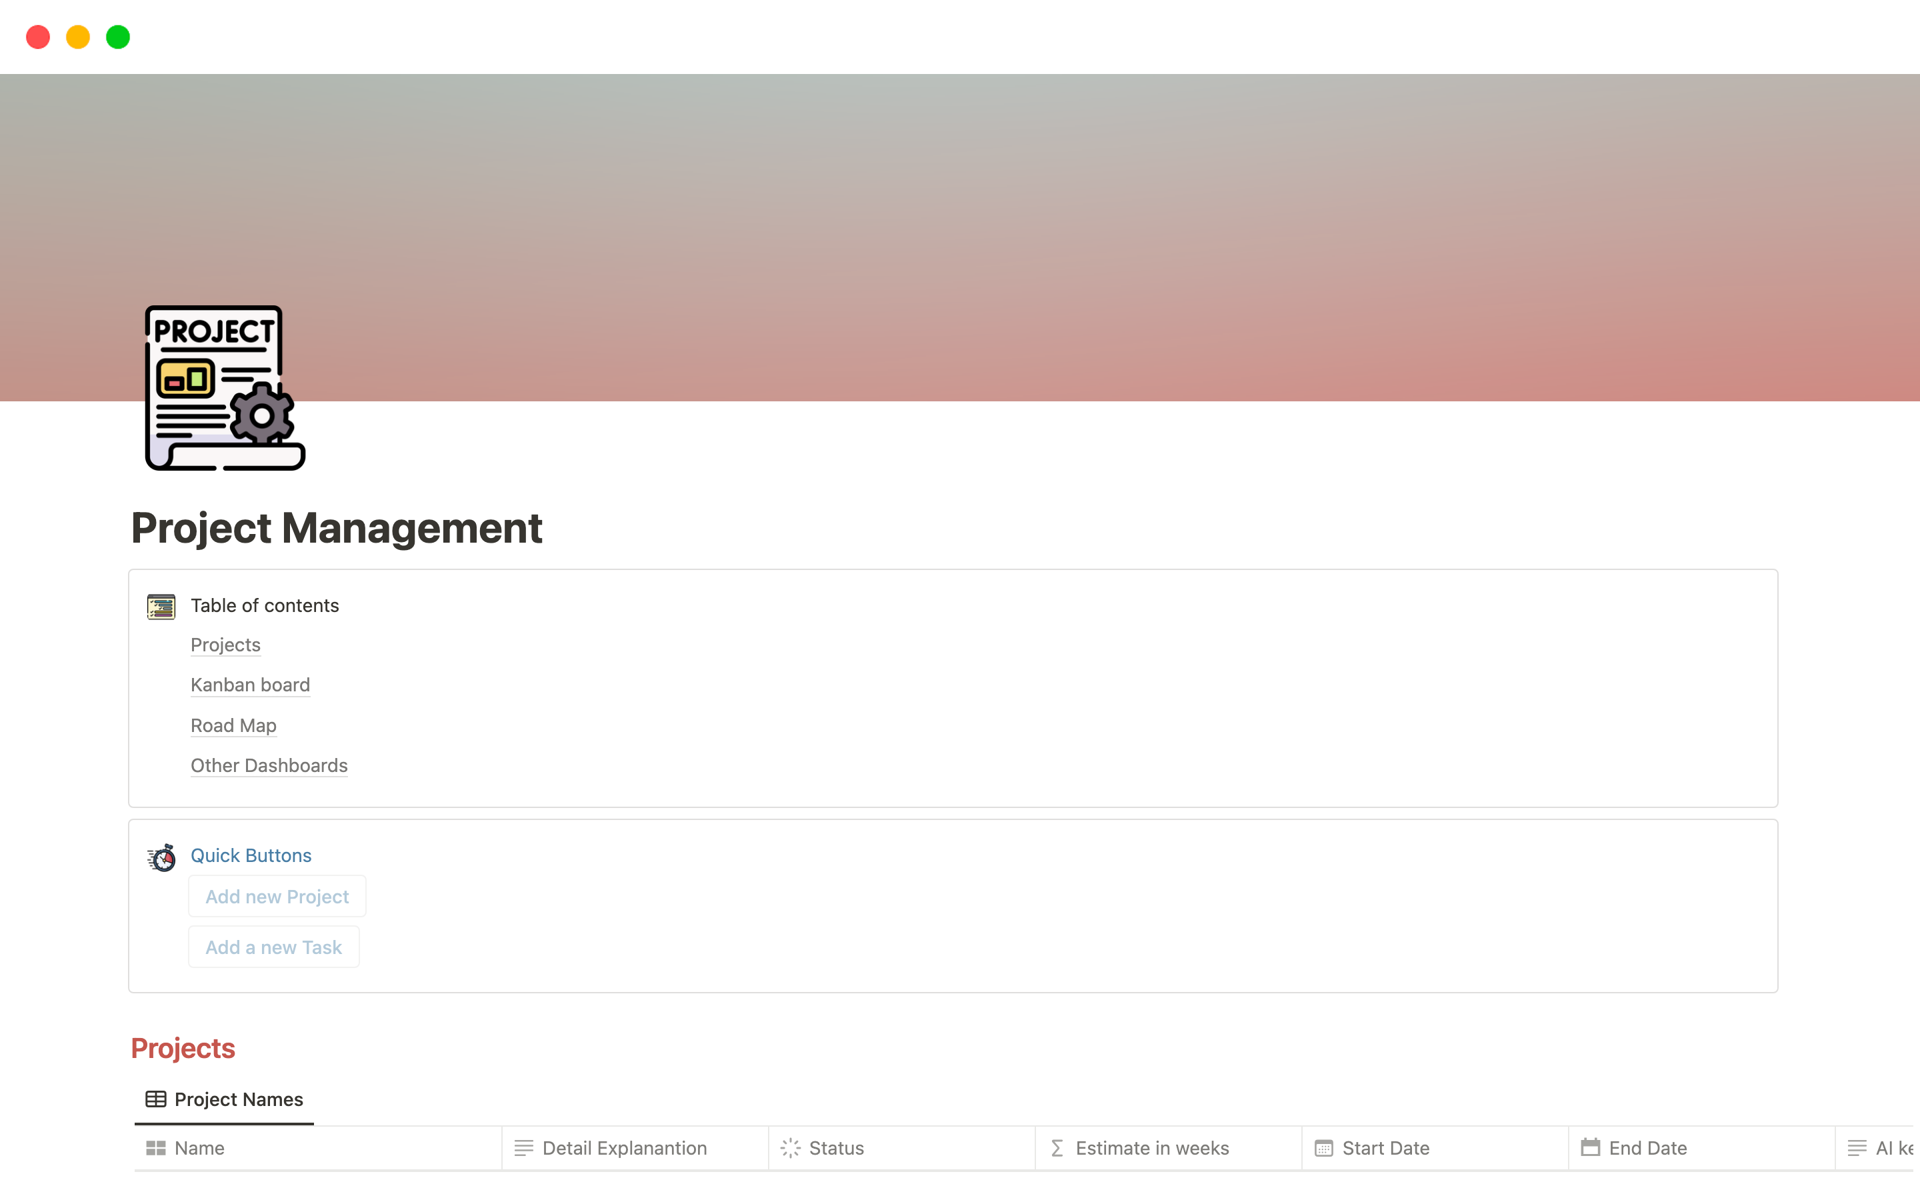 This is a project management dashboard, simplified